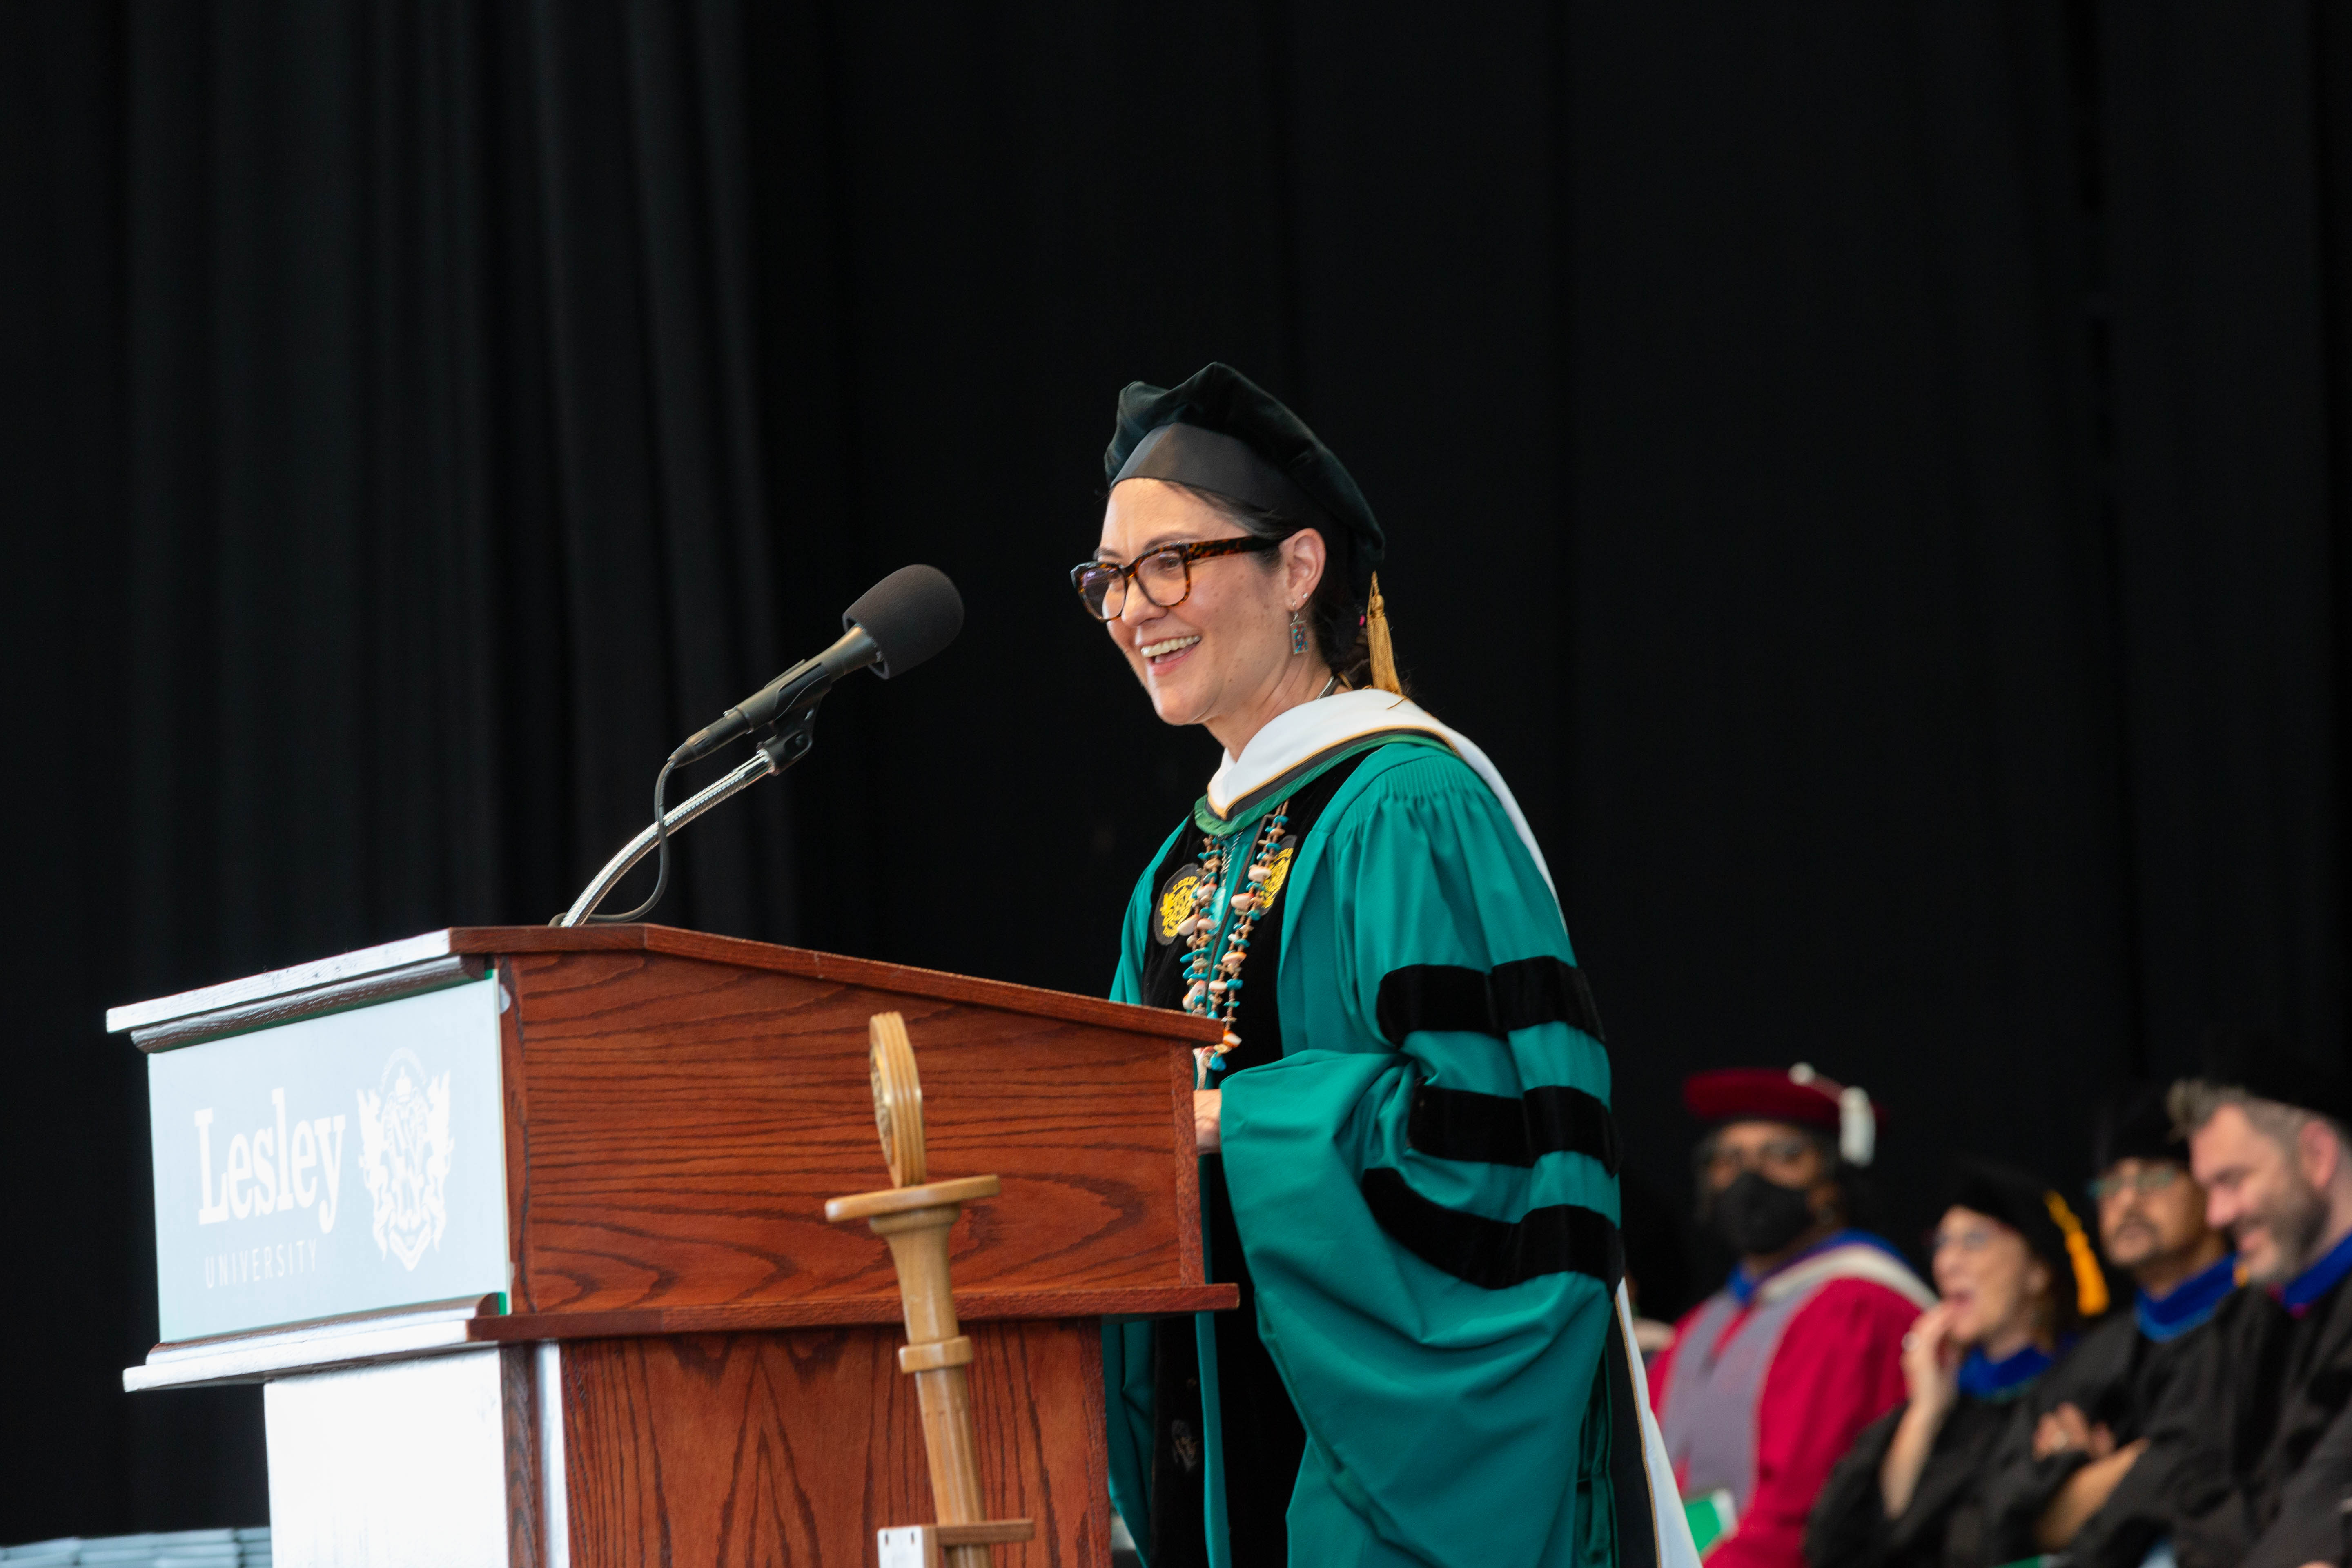 Shelly Lowe speaks at Commencement